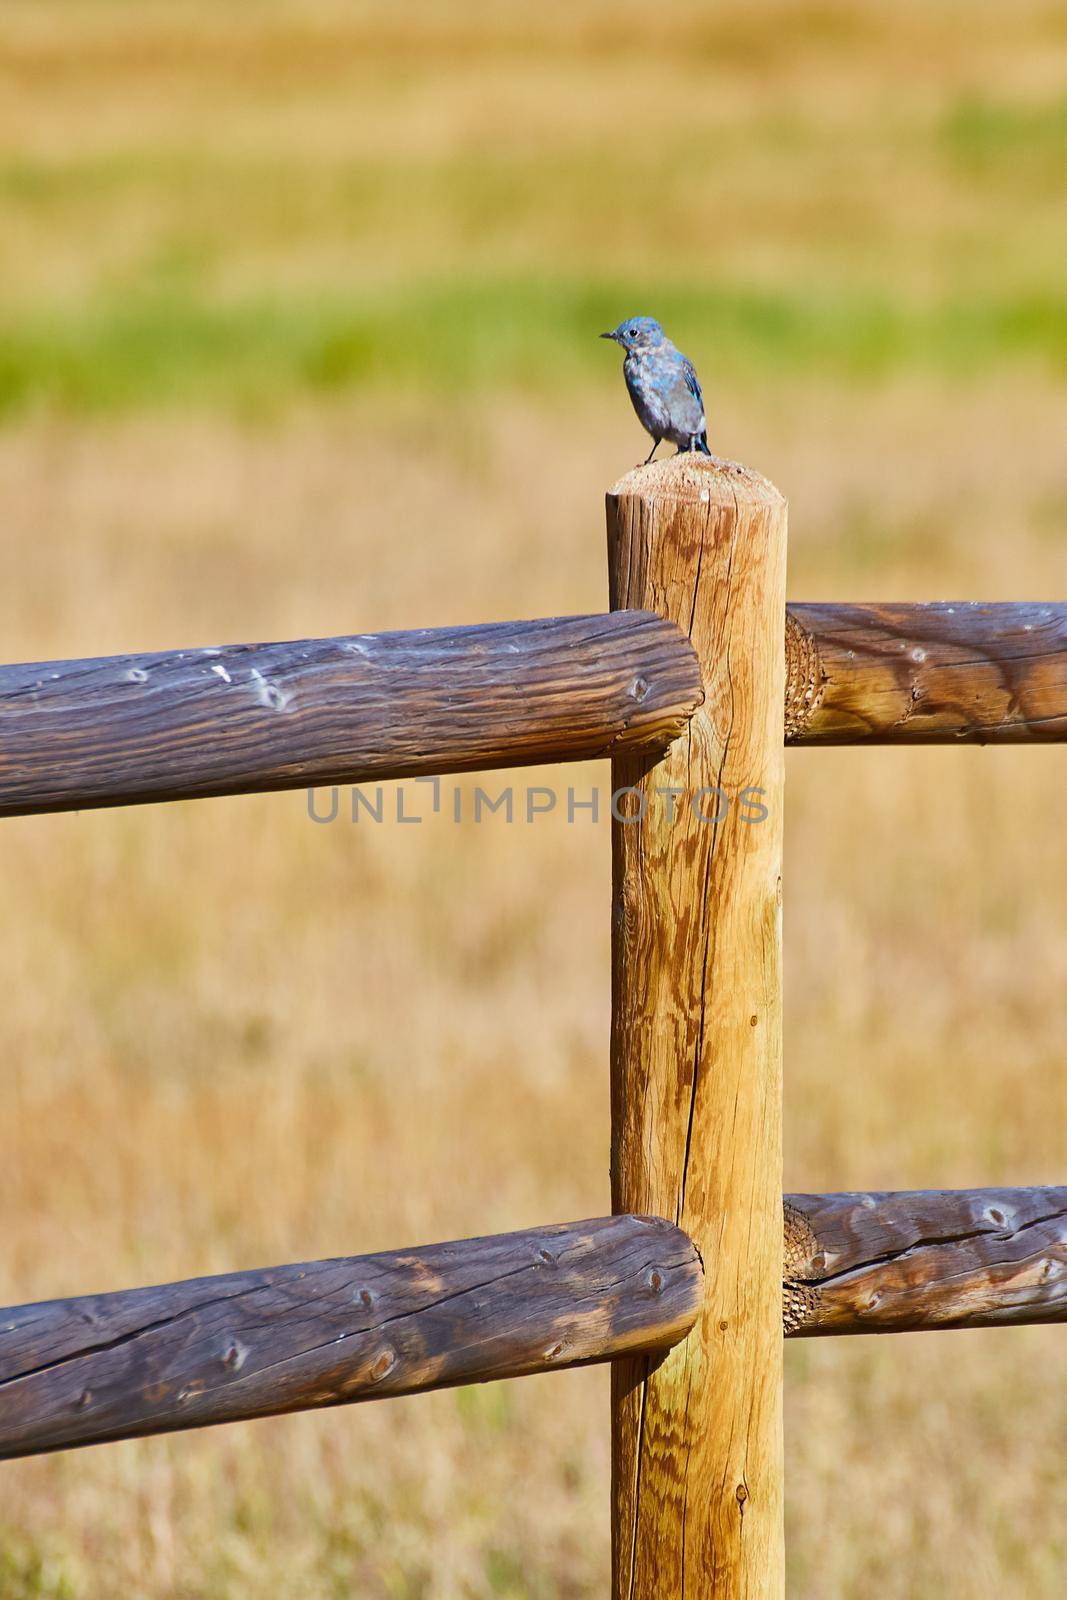 Image of Vertical wood fence post with blue bird on top